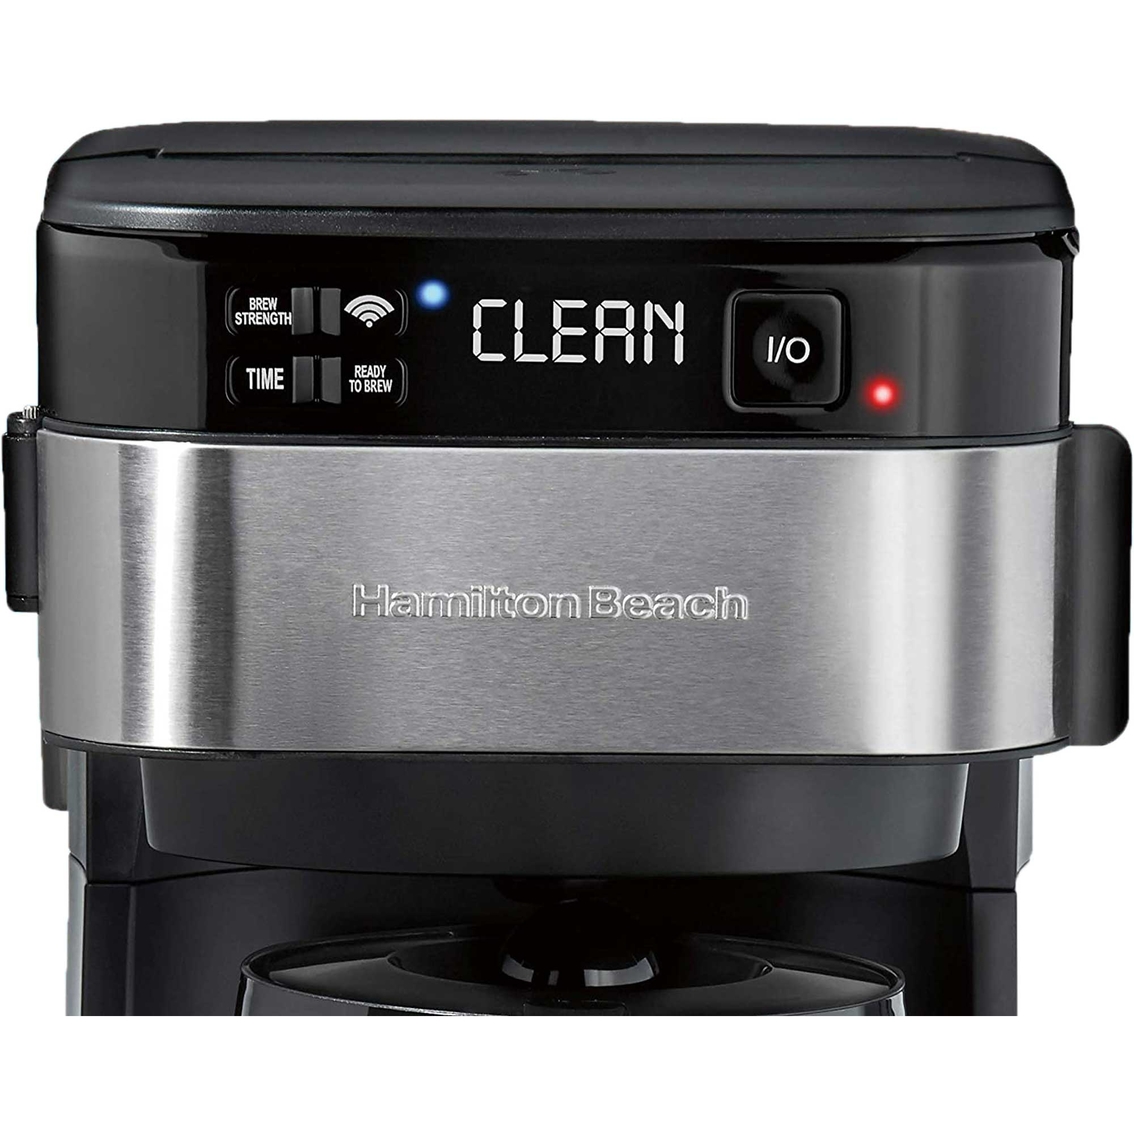 Hamilton Beach Works With Alexa Smart Connected Coffee Maker HOW TO SET  TIME 